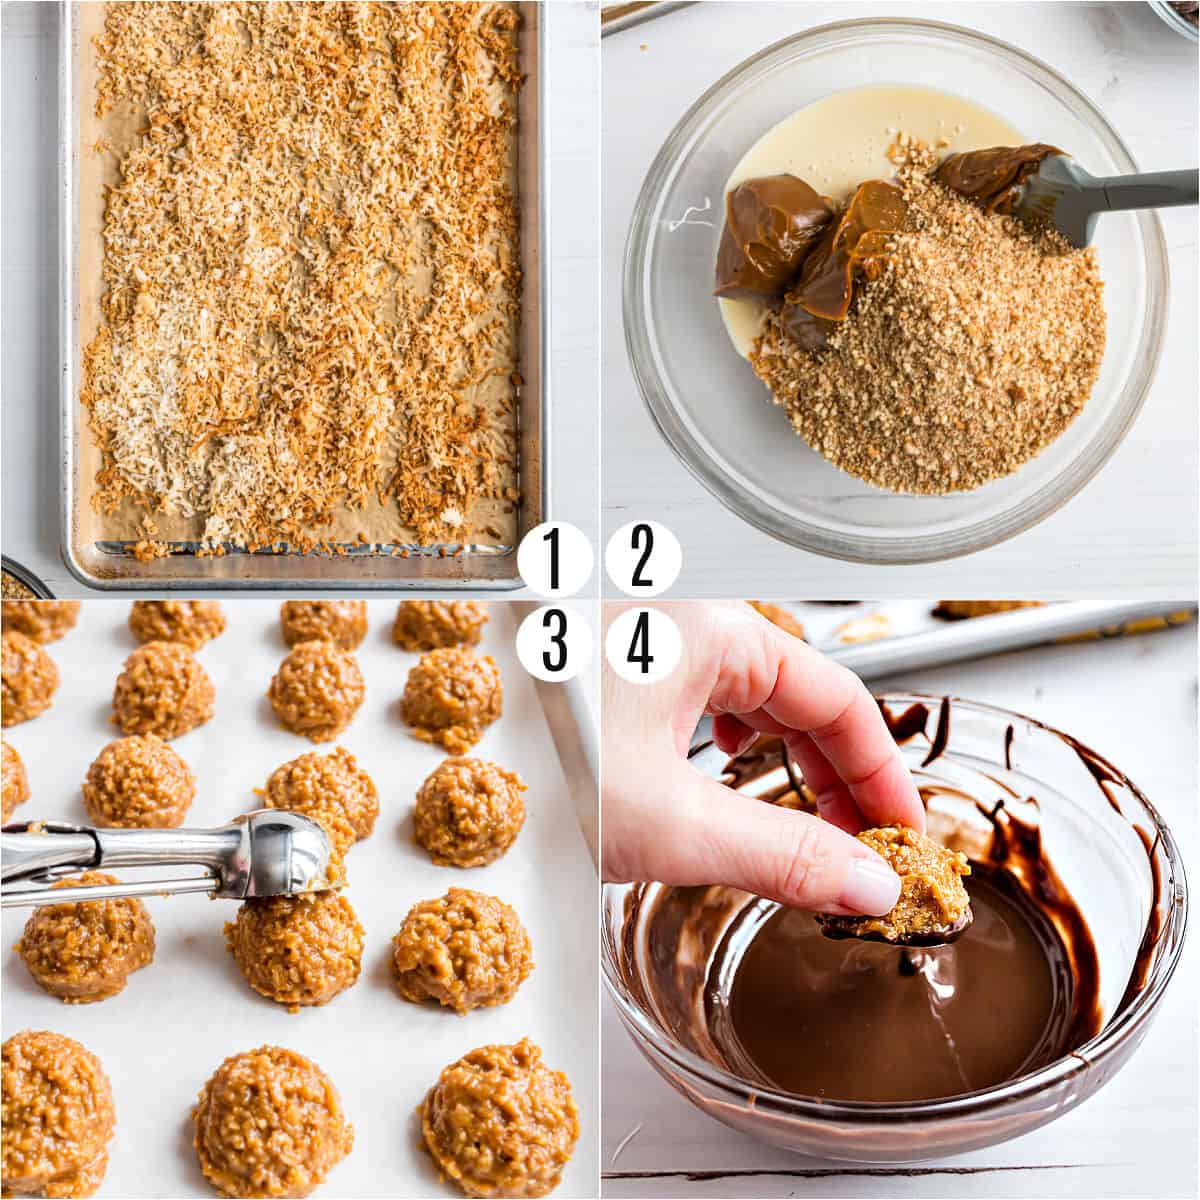 Step by step photos showing how to make samoa truffles.